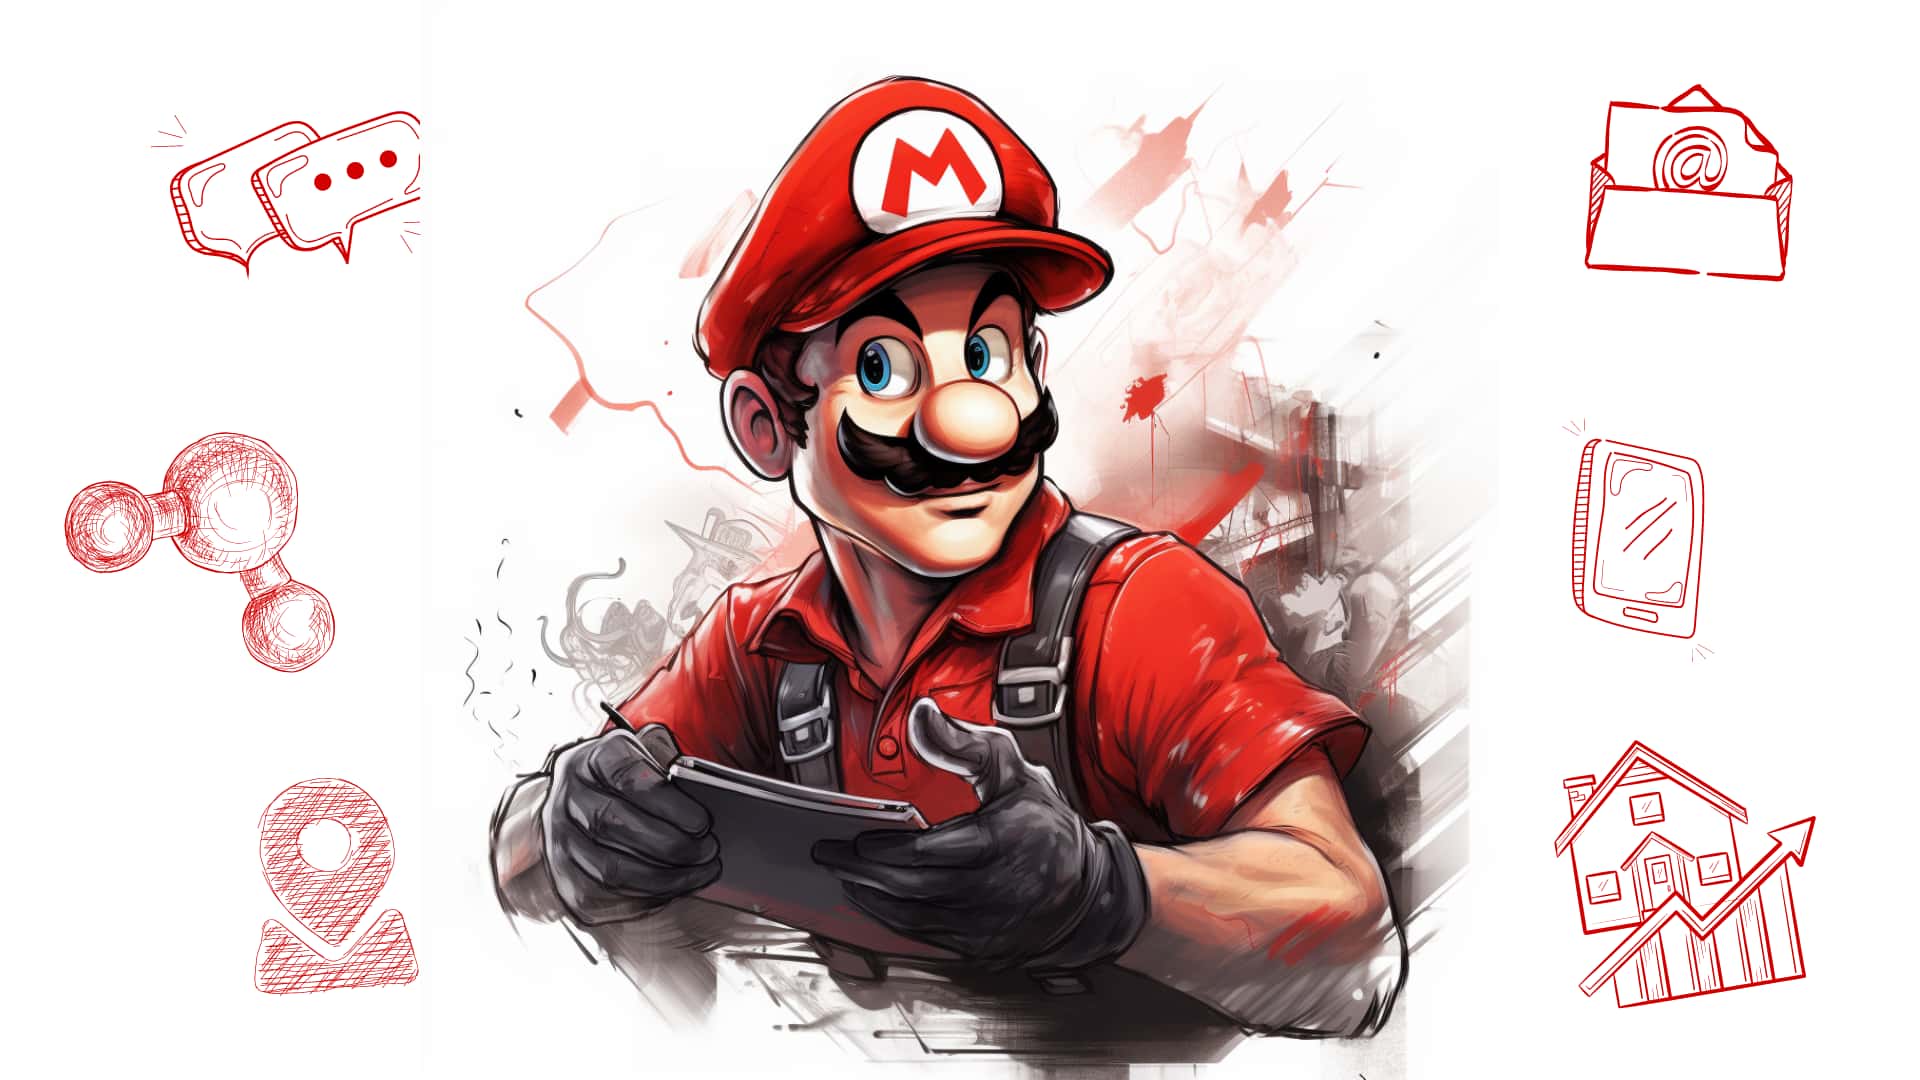 A hand-drawn, vintage style image depicting the character Super Mario, dressed in his iconic red and blue outfit, standing next to a red and green old-fashioned plumbing van labeled 'Mario's Plumbing Services.' Mario is working on his plumbing marketing guide.